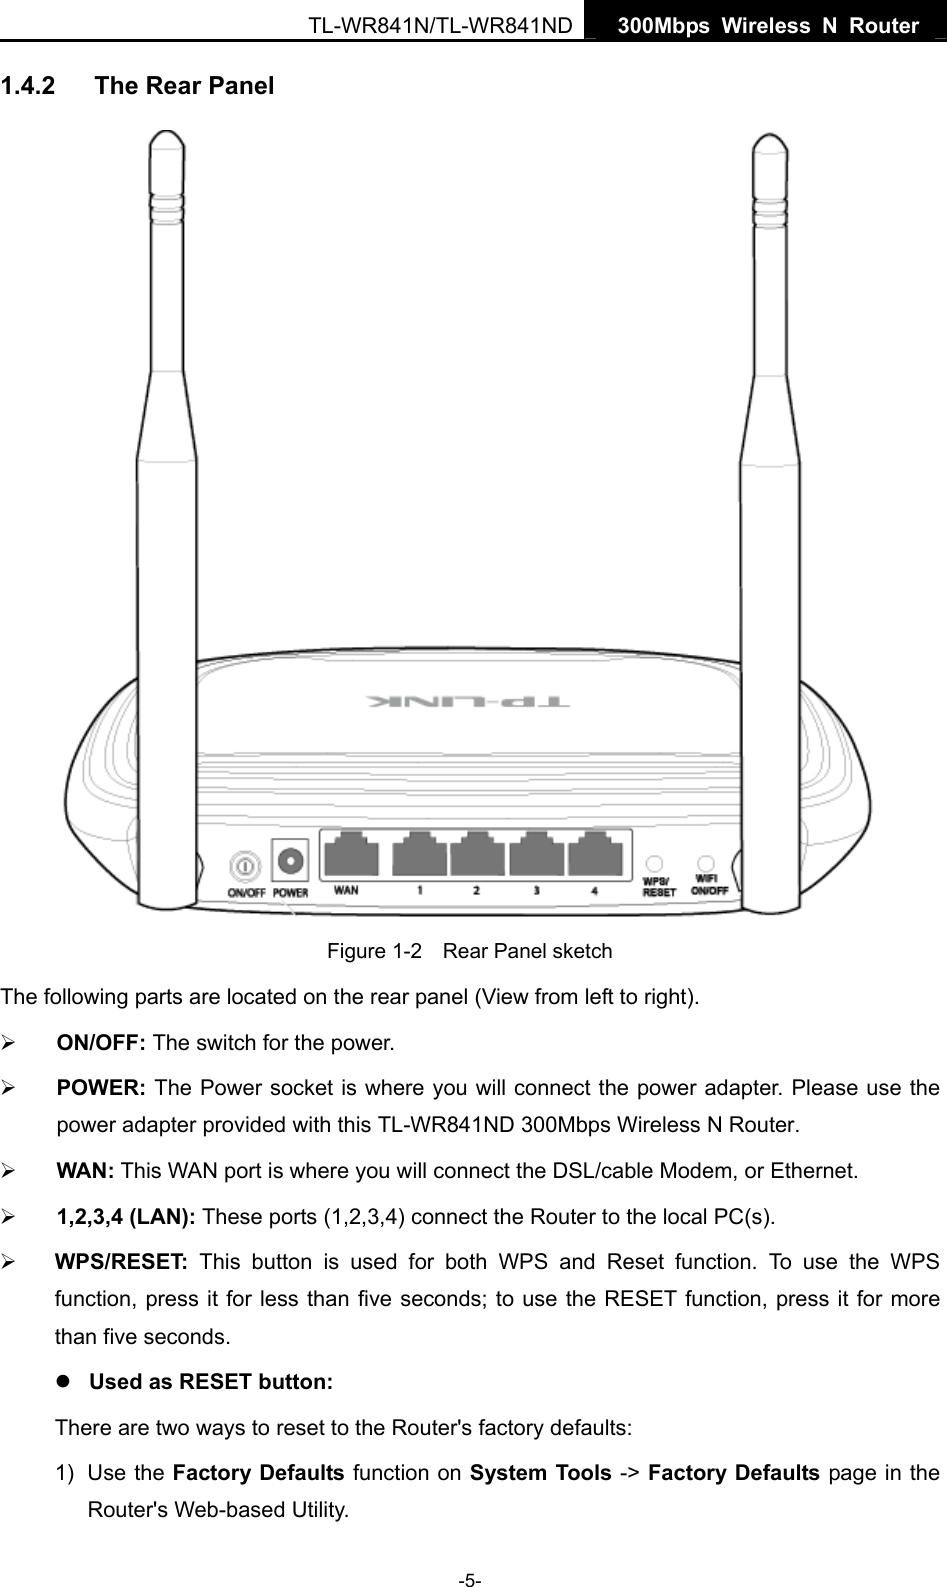   300Mbps Wireless N Router TL-WR841N/TL-WR841ND -5- 1.4.2  The Rear Panel  Figure 1-2    Rear Panel sketch The following parts are located on the rear panel (View from left to right). ¾ ON/OFF: The switch for the power. ¾ POWER: The Power socket is where you will connect the power adapter. Please use the power adapter provided with this TL-WR841ND 300Mbps Wireless N Router. ¾ WAN: This WAN port is where you will connect the DSL/cable Modem, or Ethernet. ¾ 1,2,3,4 (LAN): These ports (1,2,3,4) connect the Router to the local PC(s). ¾ WPS/RESET:  This button is used for both WPS and Reset function. To use the WPS function, press it for less than five seconds; to use the RESET function, press it for more than five seconds.   z Used as RESET button: There are two ways to reset to the Router&apos;s factory defaults: 1) Use the Factory Defaults function on System Tools -&gt; Factory Defaults page in the Router&apos;s Web-based Utility. 